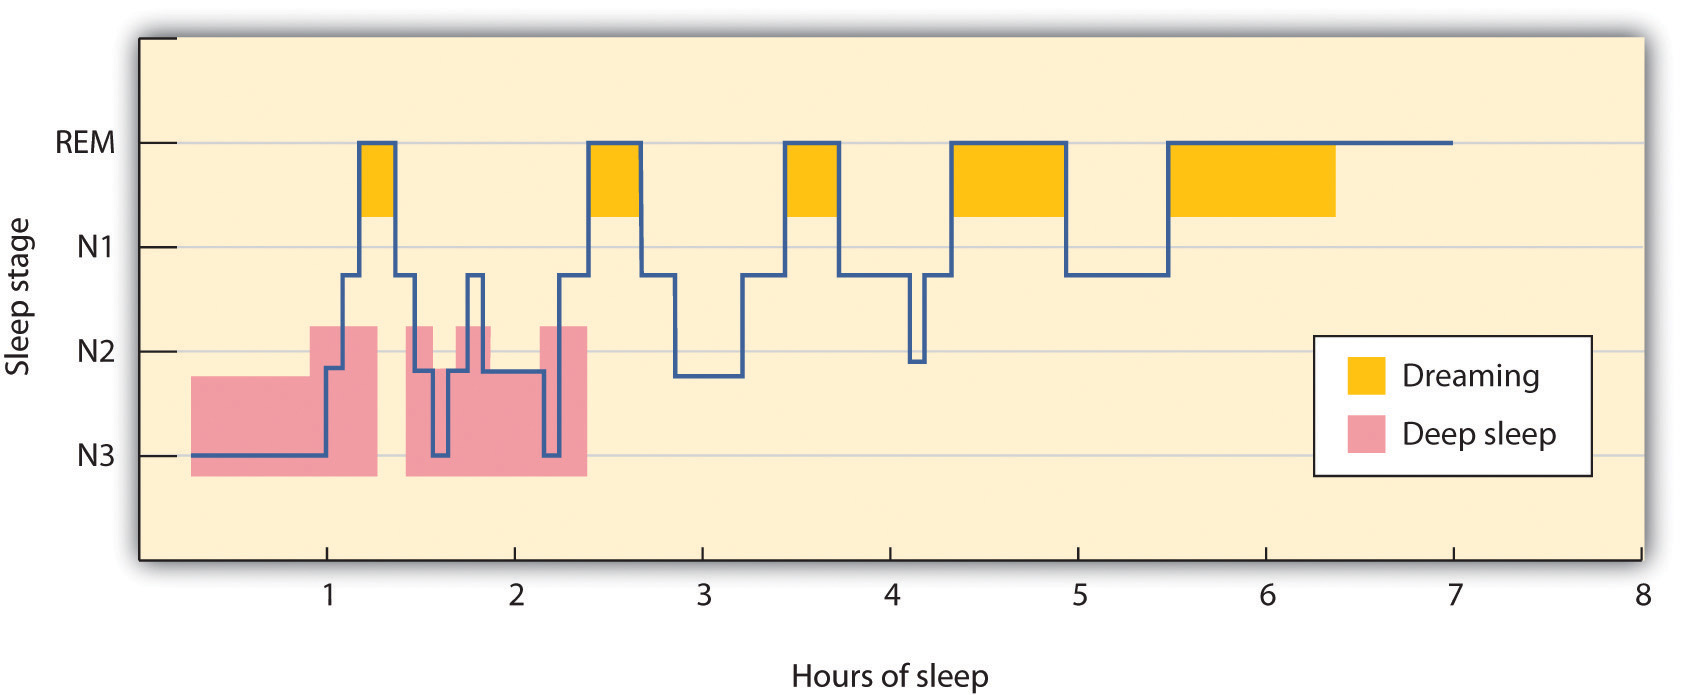 During a typical night, our sleep cycles move between REM and non-REM sleep, with each cycle repeating at about 90-minute intervals. The deeper non-REM sleep stages usually occur earlier in the night.